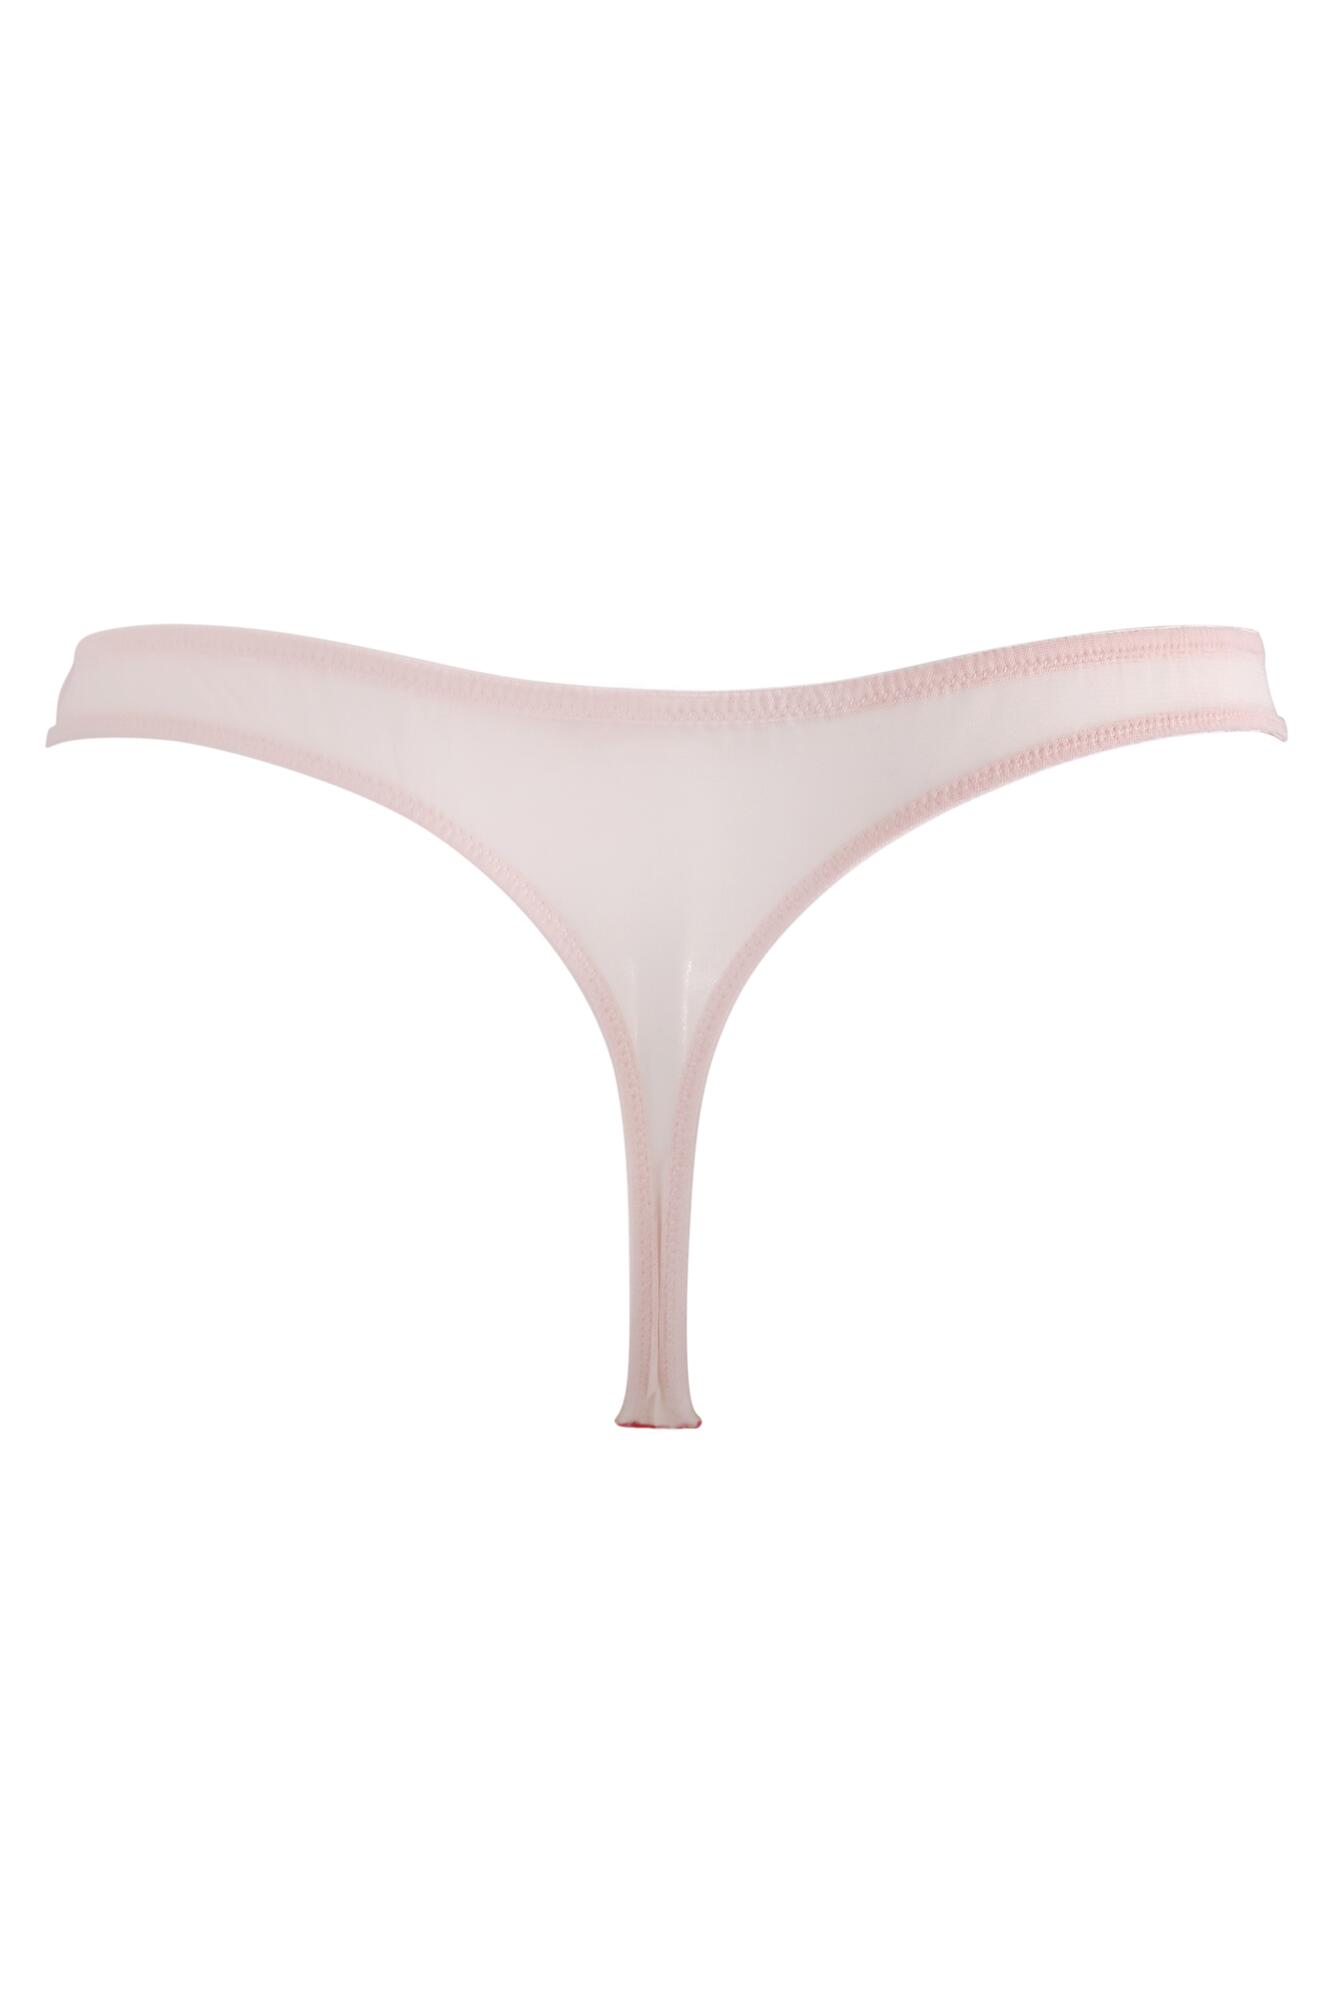 Couture Thong, Bloom